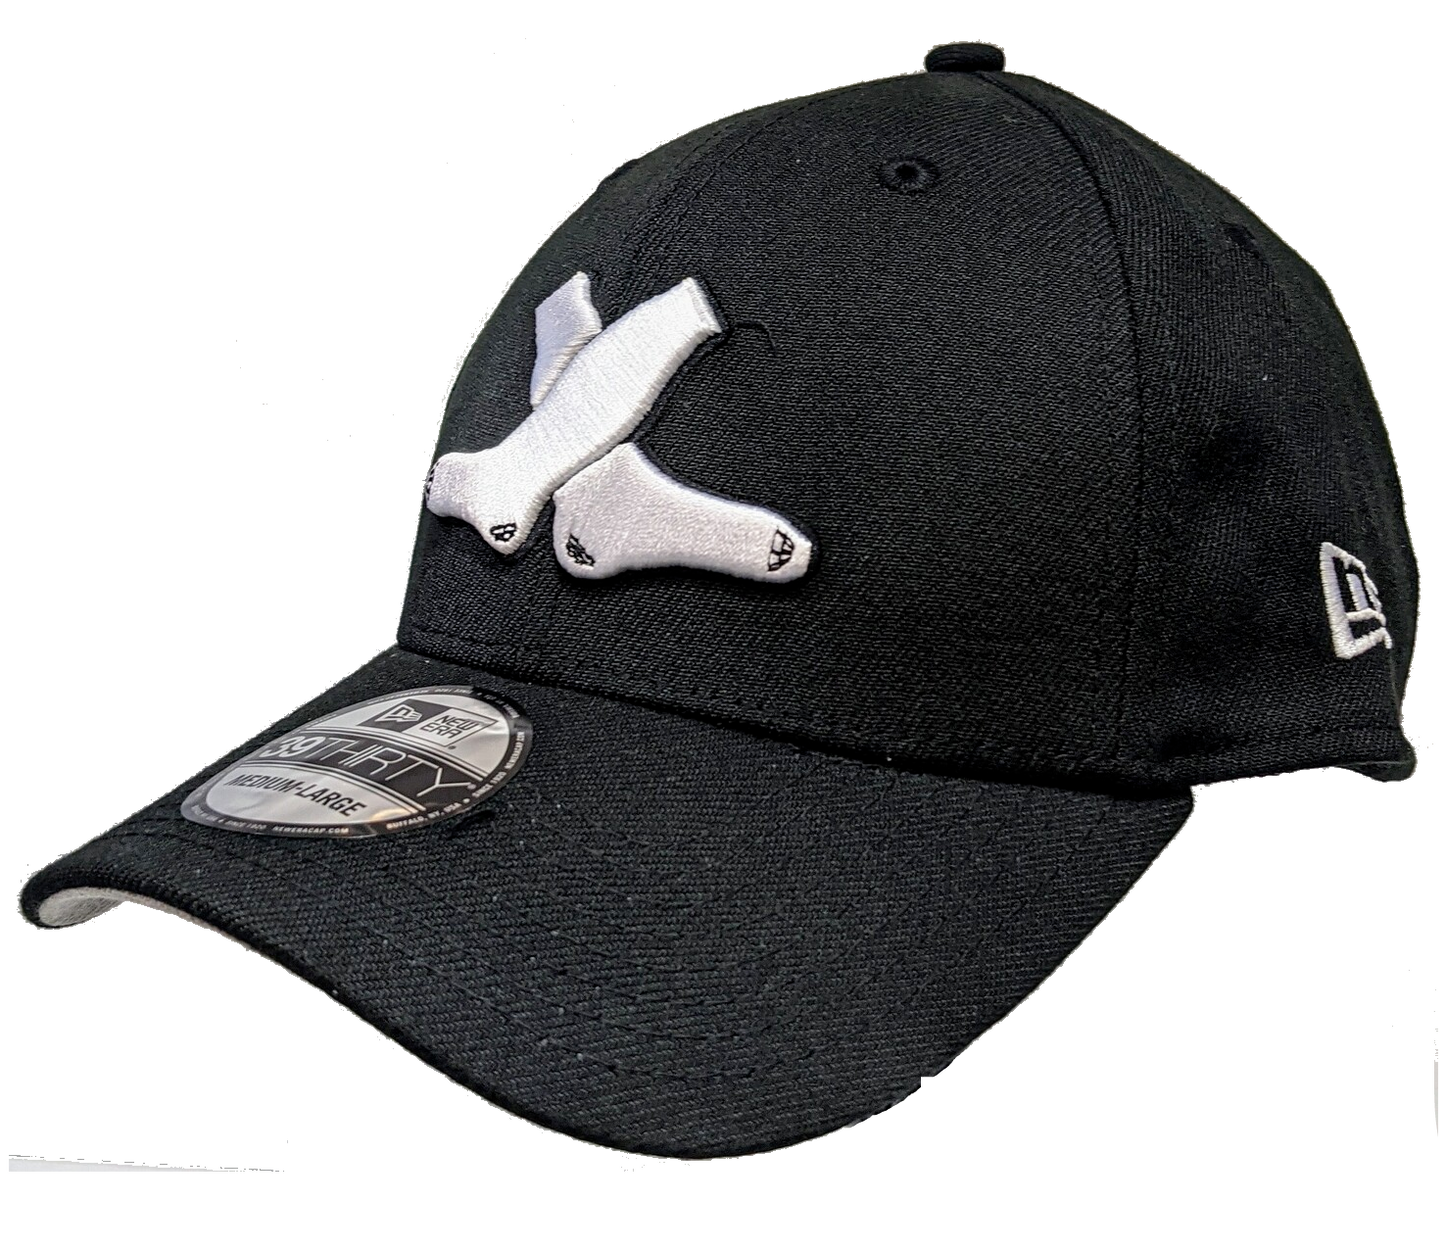 Men's Chicago White Sox Cooperstown Collection 1920 Cross Sox Black 39THIRTY Side Patch Flex Fit New Era Hat